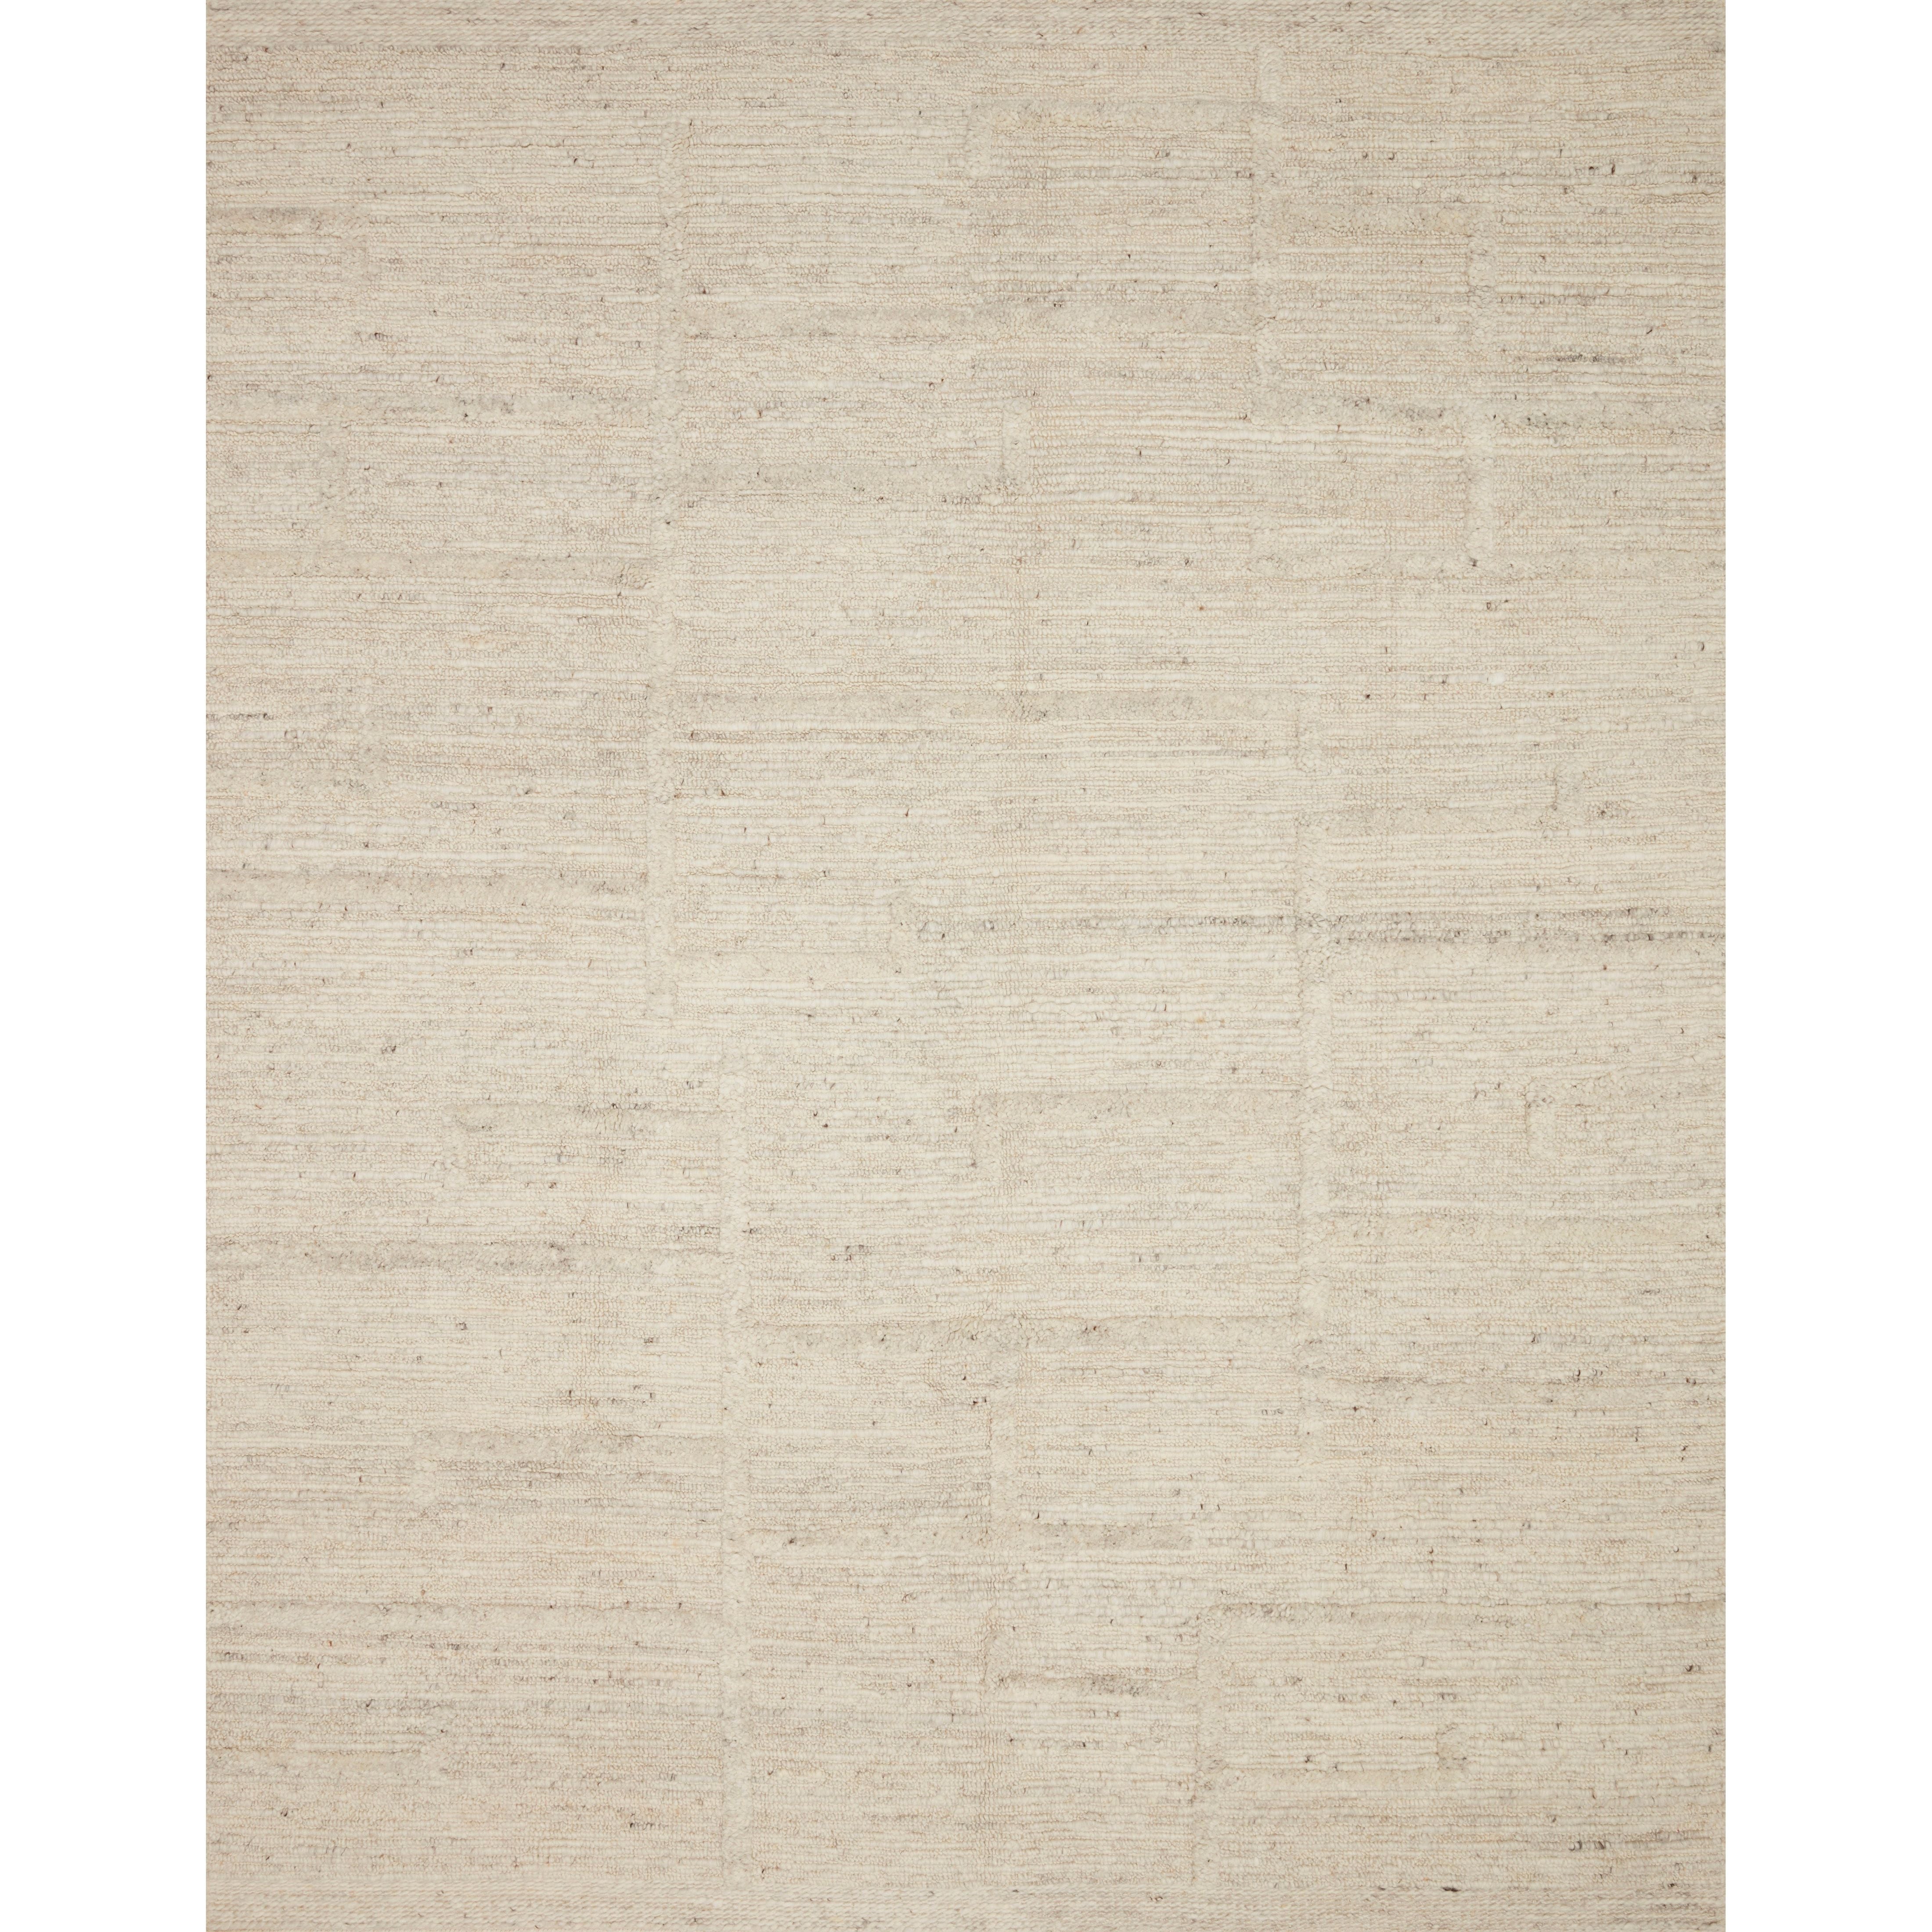 Hand-woven of 100% wool in India, the Loloi Rayan Ivory Area Rug, or RAY-01, sets the tone for a calming atmosphere. Each design is crafted of textural highs and lows paired with neutral tones to create and engaging understatement. The perfect rug for your bedroom, office, or other medium traffic area. 